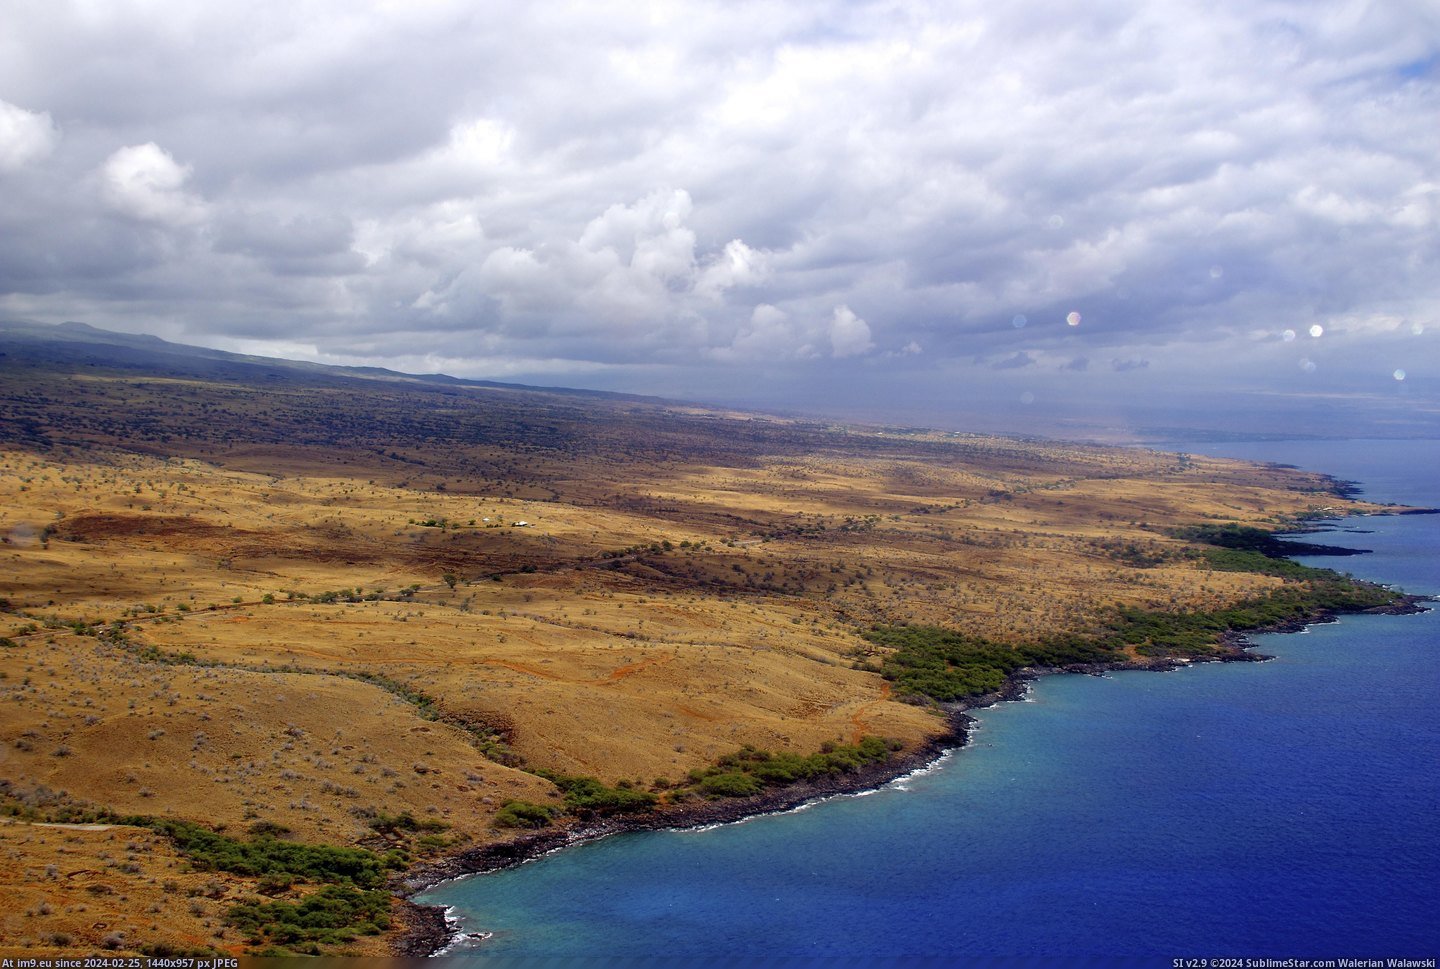 #One #Big #World #Hawaii #Climates #Island #Vol #Desert [Earthporn] Hawaii's Big Island has one of the most diverse climates in the world. 1-3 dense rainforest, 1-3 desert, and 1-3 vol Pic. (Bild von album My r/EARTHPORN favs))